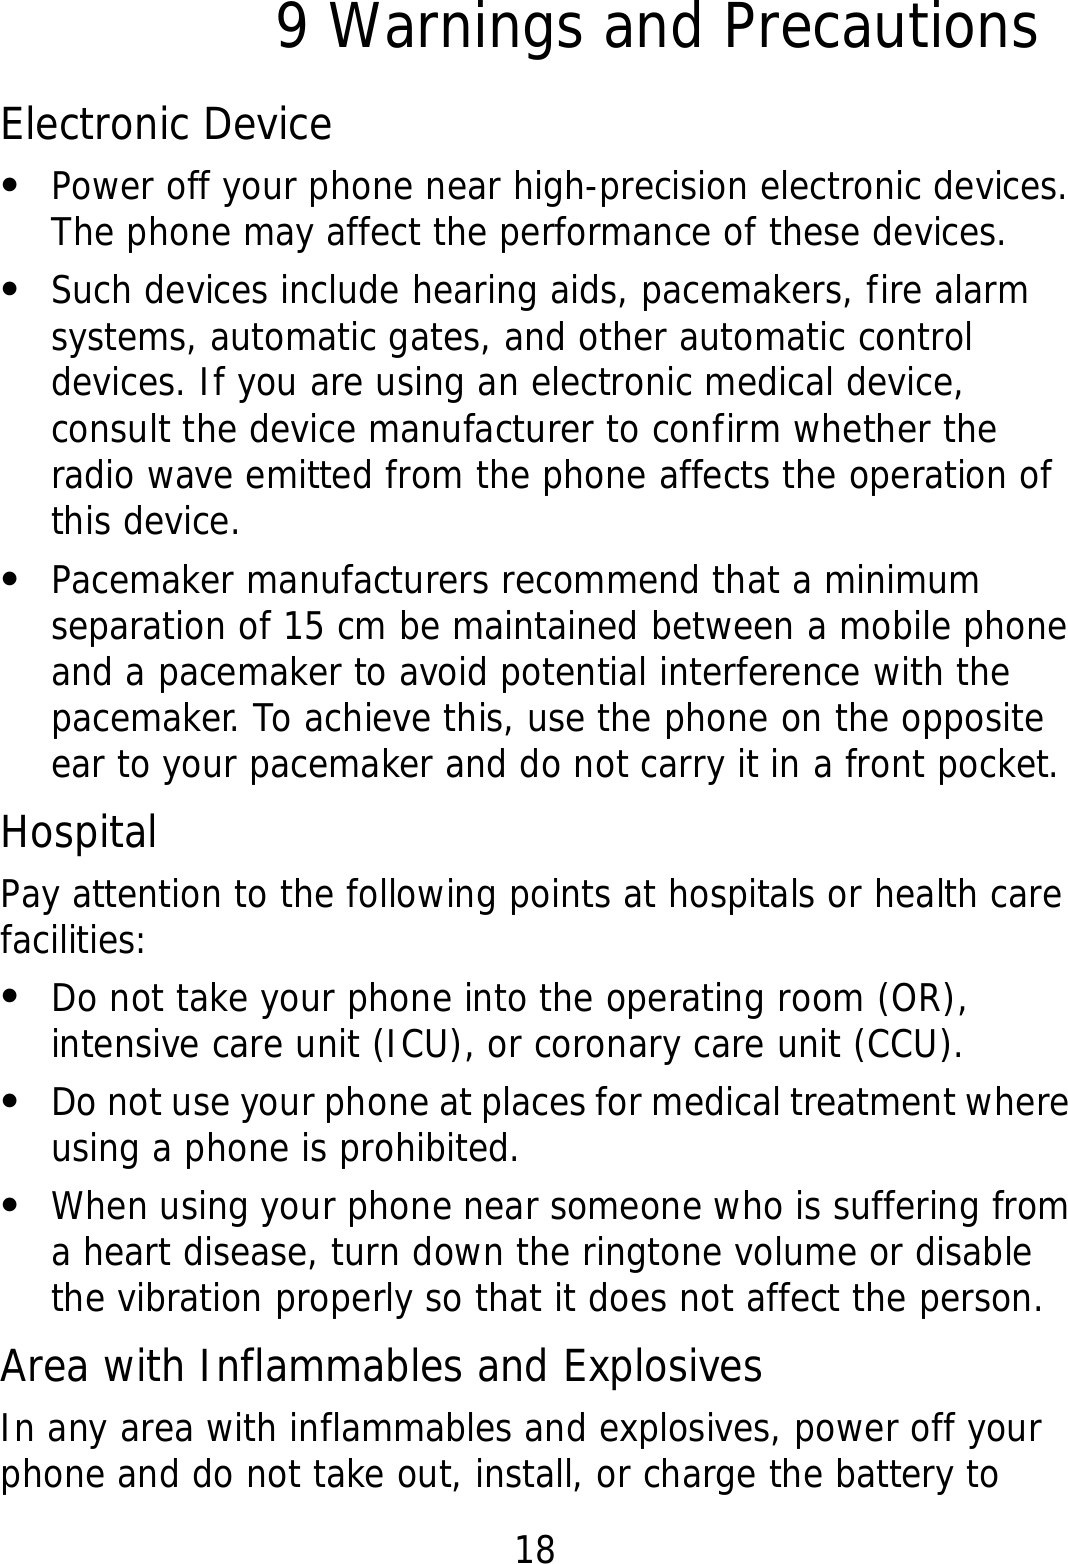 18 9 Warnings and Precautions Electronic Device z Power off your phone near high-precision electronic devices. The phone may affect the performance of these devices. z Such devices include hearing aids, pacemakers, fire alarm systems, automatic gates, and other automatic control devices. If you are using an electronic medical device, consult the device manufacturer to confirm whether the radio wave emitted from the phone affects the operation of this device. z Pacemaker manufacturers recommend that a minimum separation of 15 cm be maintained between a mobile phone and a pacemaker to avoid potential interference with the pacemaker. To achieve this, use the phone on the opposite ear to your pacemaker and do not carry it in a front pocket. Hospital Pay attention to the following points at hospitals or health care facilities: z Do not take your phone into the operating room (OR), intensive care unit (ICU), or coronary care unit (CCU). z Do not use your phone at places for medical treatment where using a phone is prohibited. z When using your phone near someone who is suffering from a heart disease, turn down the ringtone volume or disable the vibration properly so that it does not affect the person. Area with Inflammables and Explosives In any area with inflammables and explosives, power off your phone and do not take out, install, or charge the battery to 